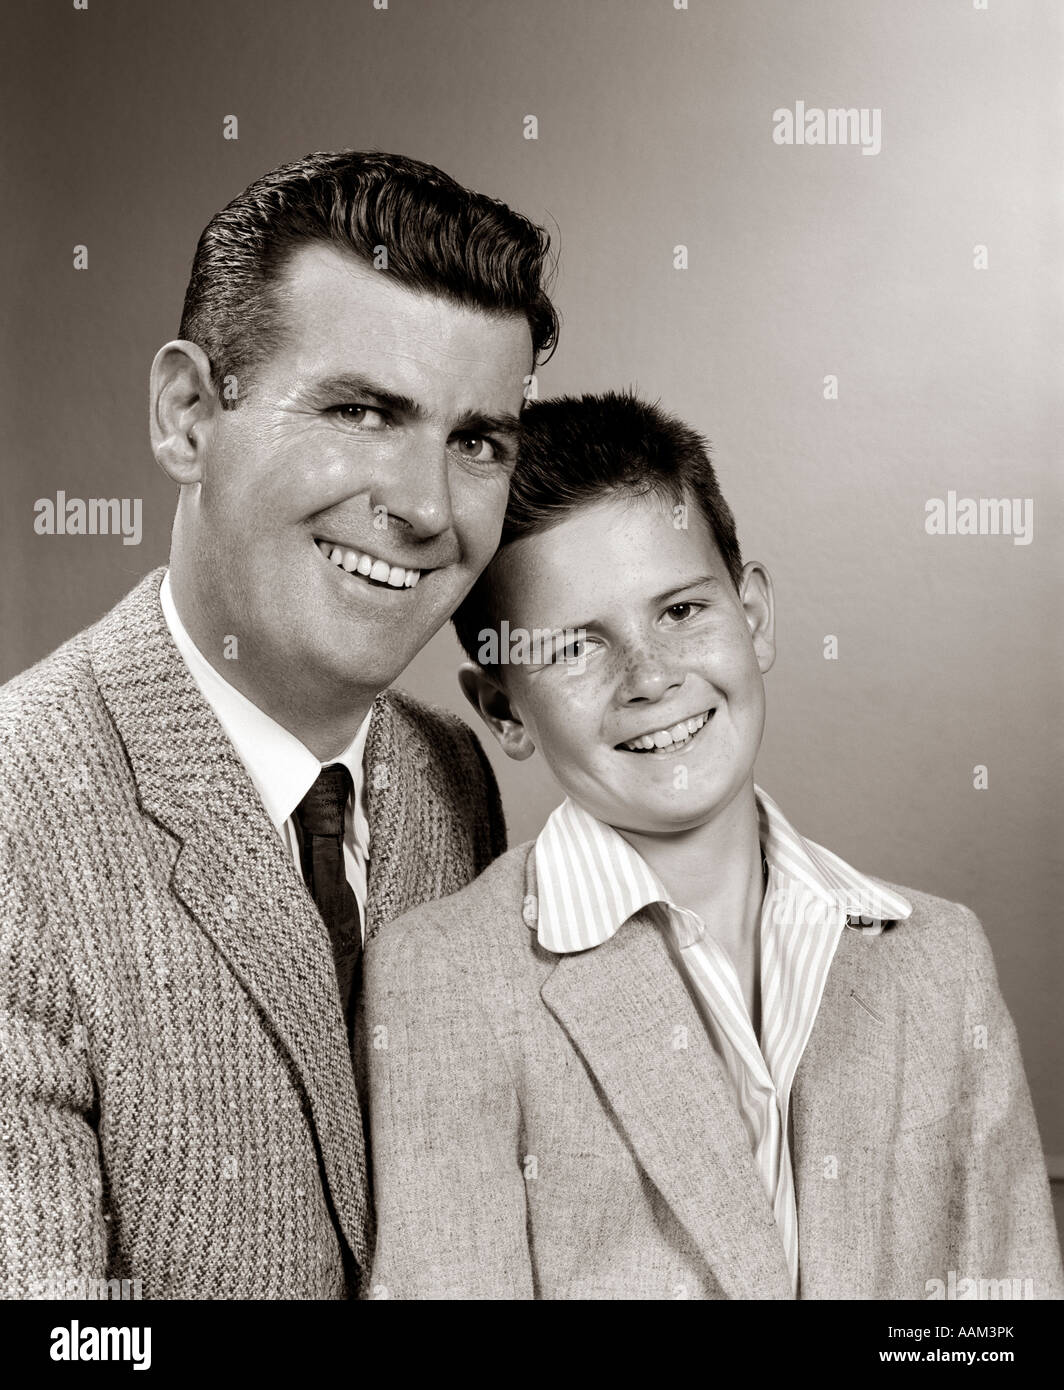 1950s STUDIO PORTRAIT SMILING MAN FATHER AND BOY SON SITTING TOGETHER LOOKING AT CAMERA Stock Photo